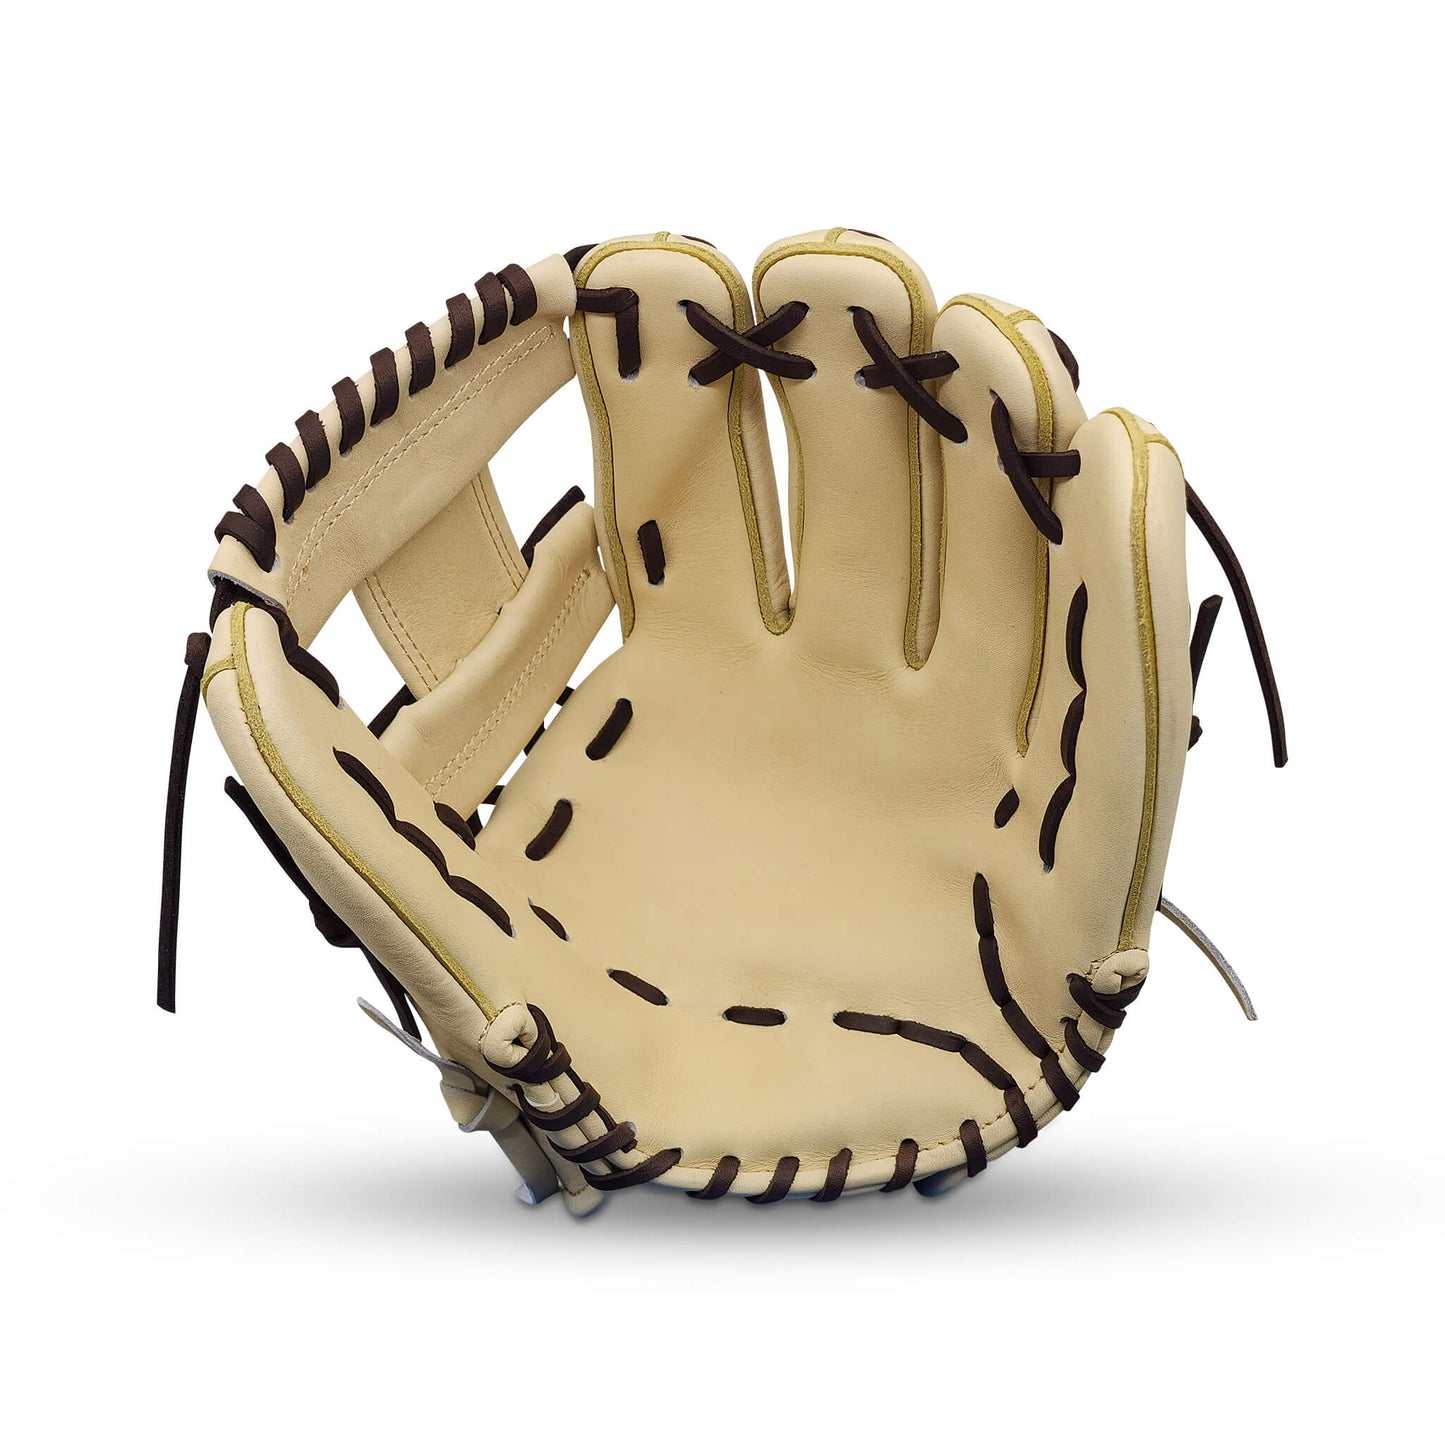 Titan Series Limited Edition 11.50” Infield Glove with I-Web, Camel Shell and Palm, Dark Brown Lacing, and Embroidered Texas Flag – RHT